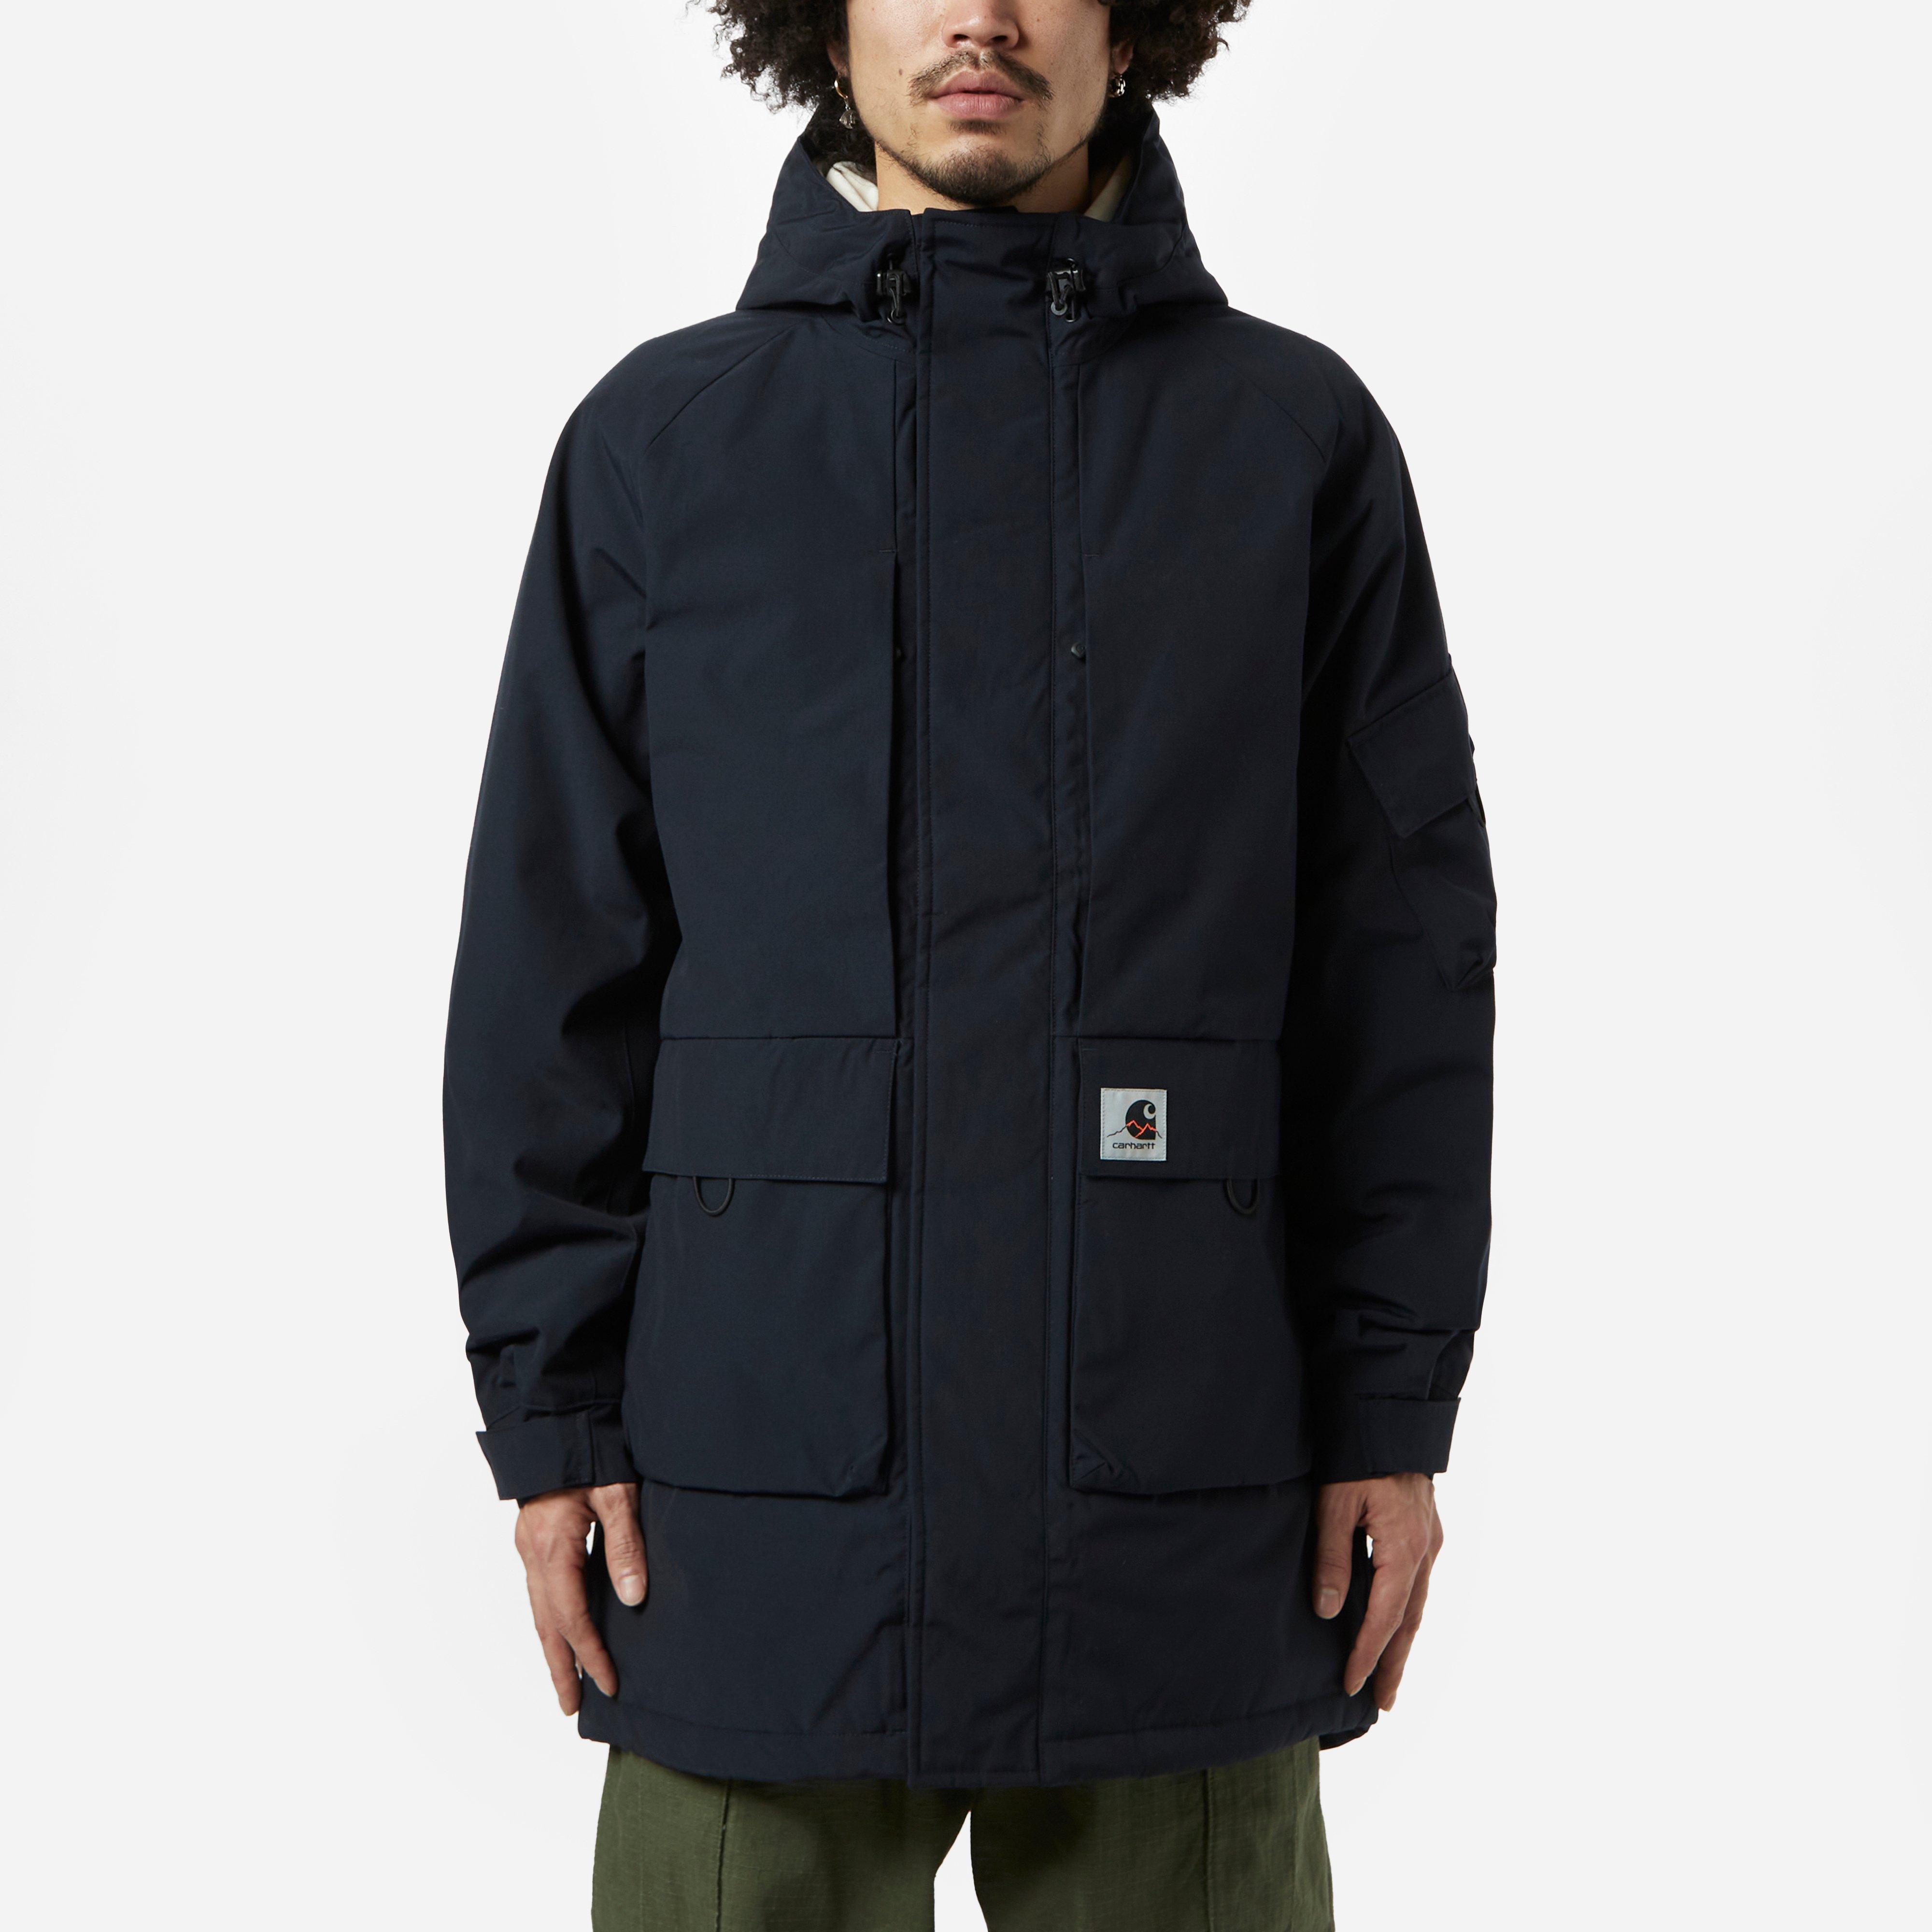 Carhartt WIP Synthetic Bode Parka Jacket in Navy (Blue) for Men - Lyst